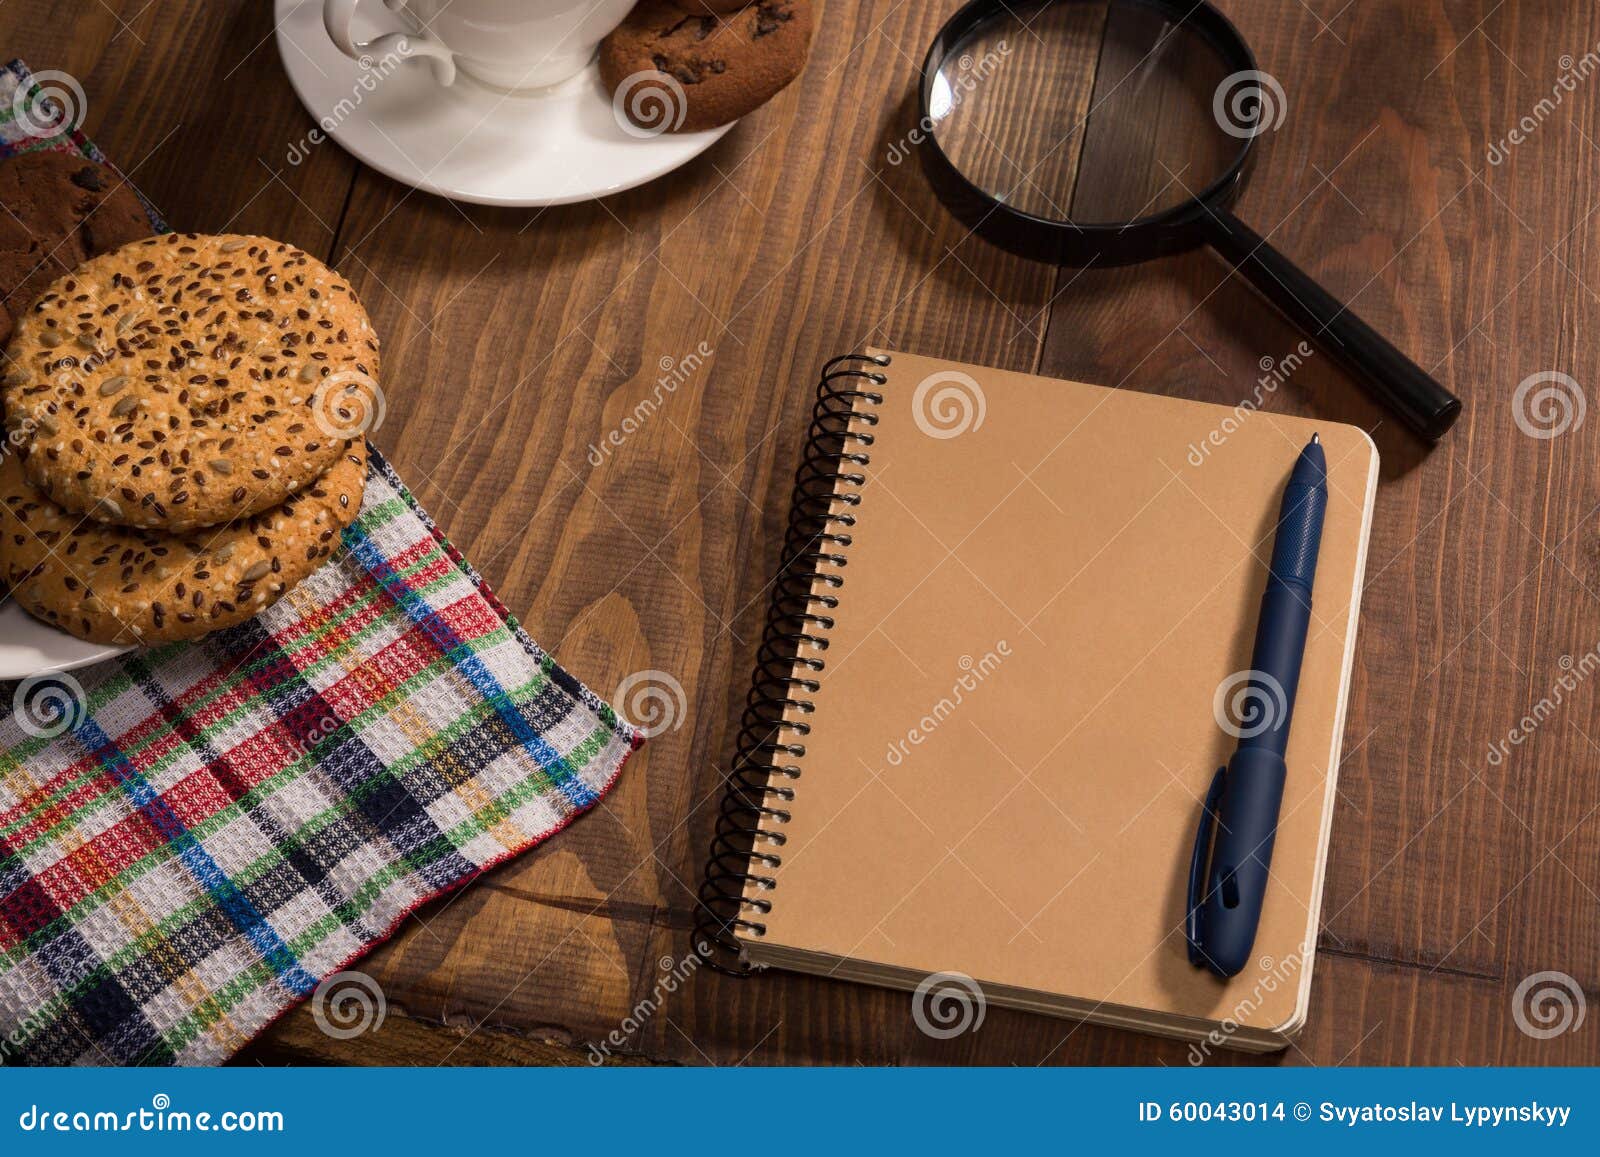 stilllife with a notebook on the wooden table